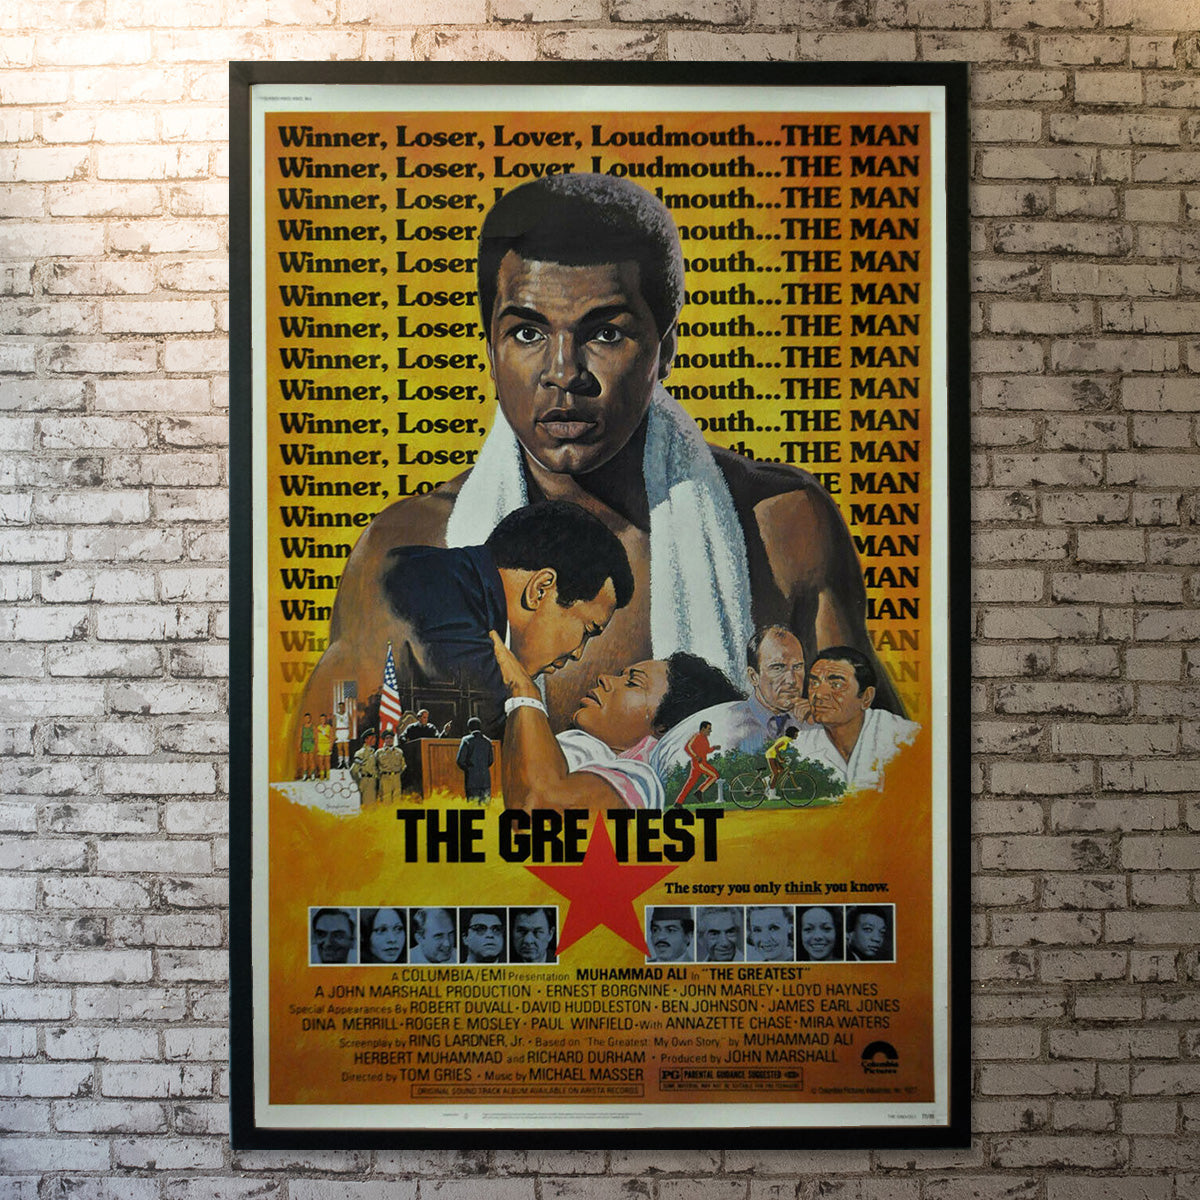 Original Movie Poster of The Greatest (1977)